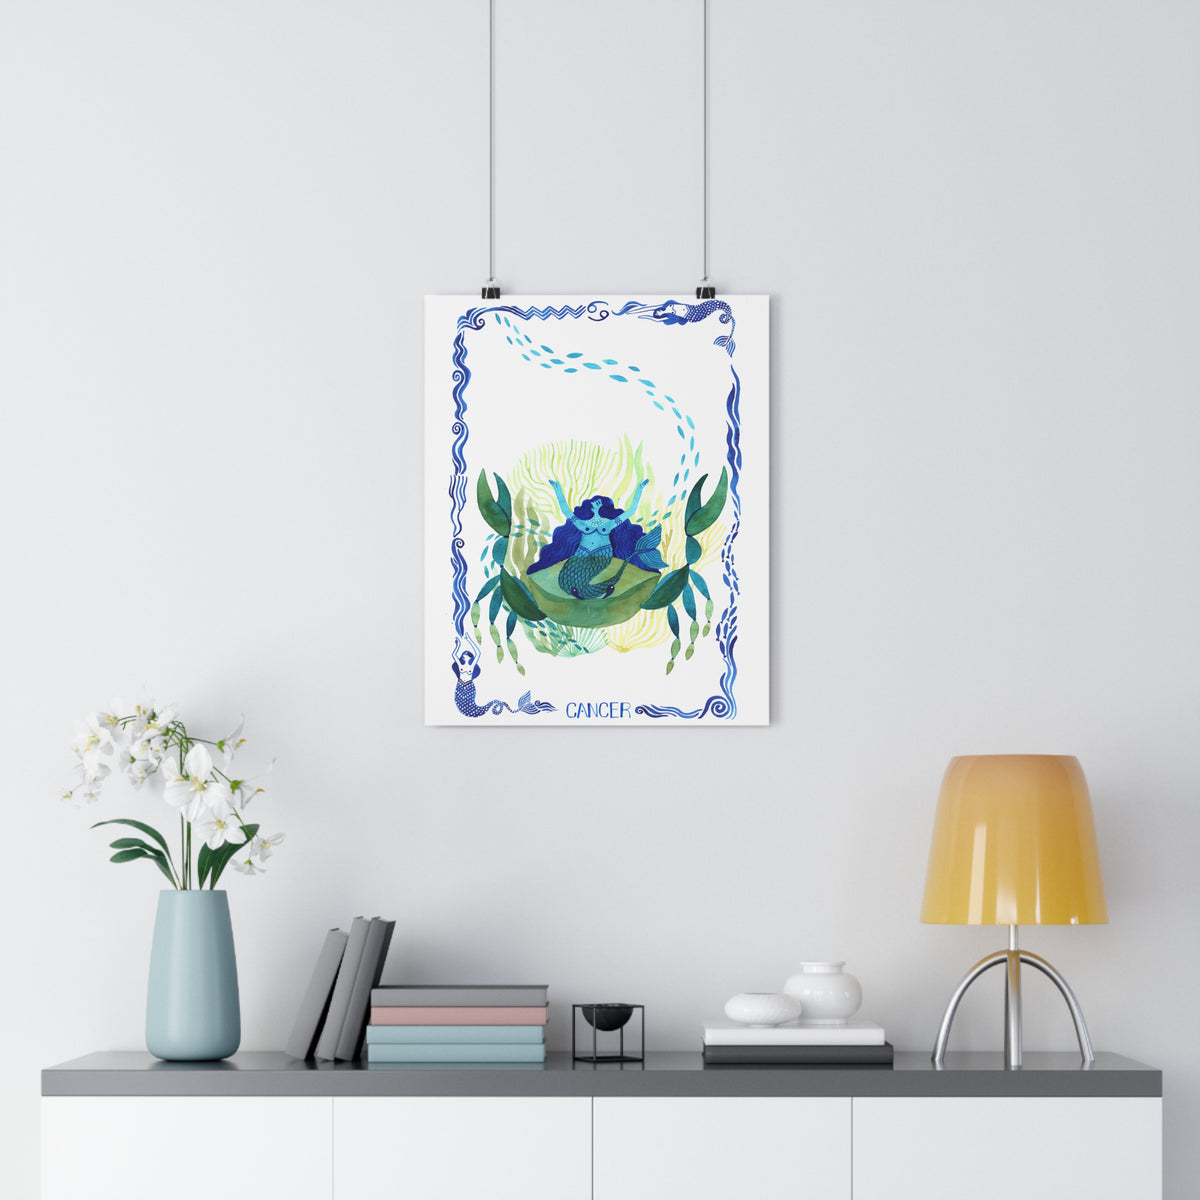 Ebb and Flow: Cancer Giclee Print